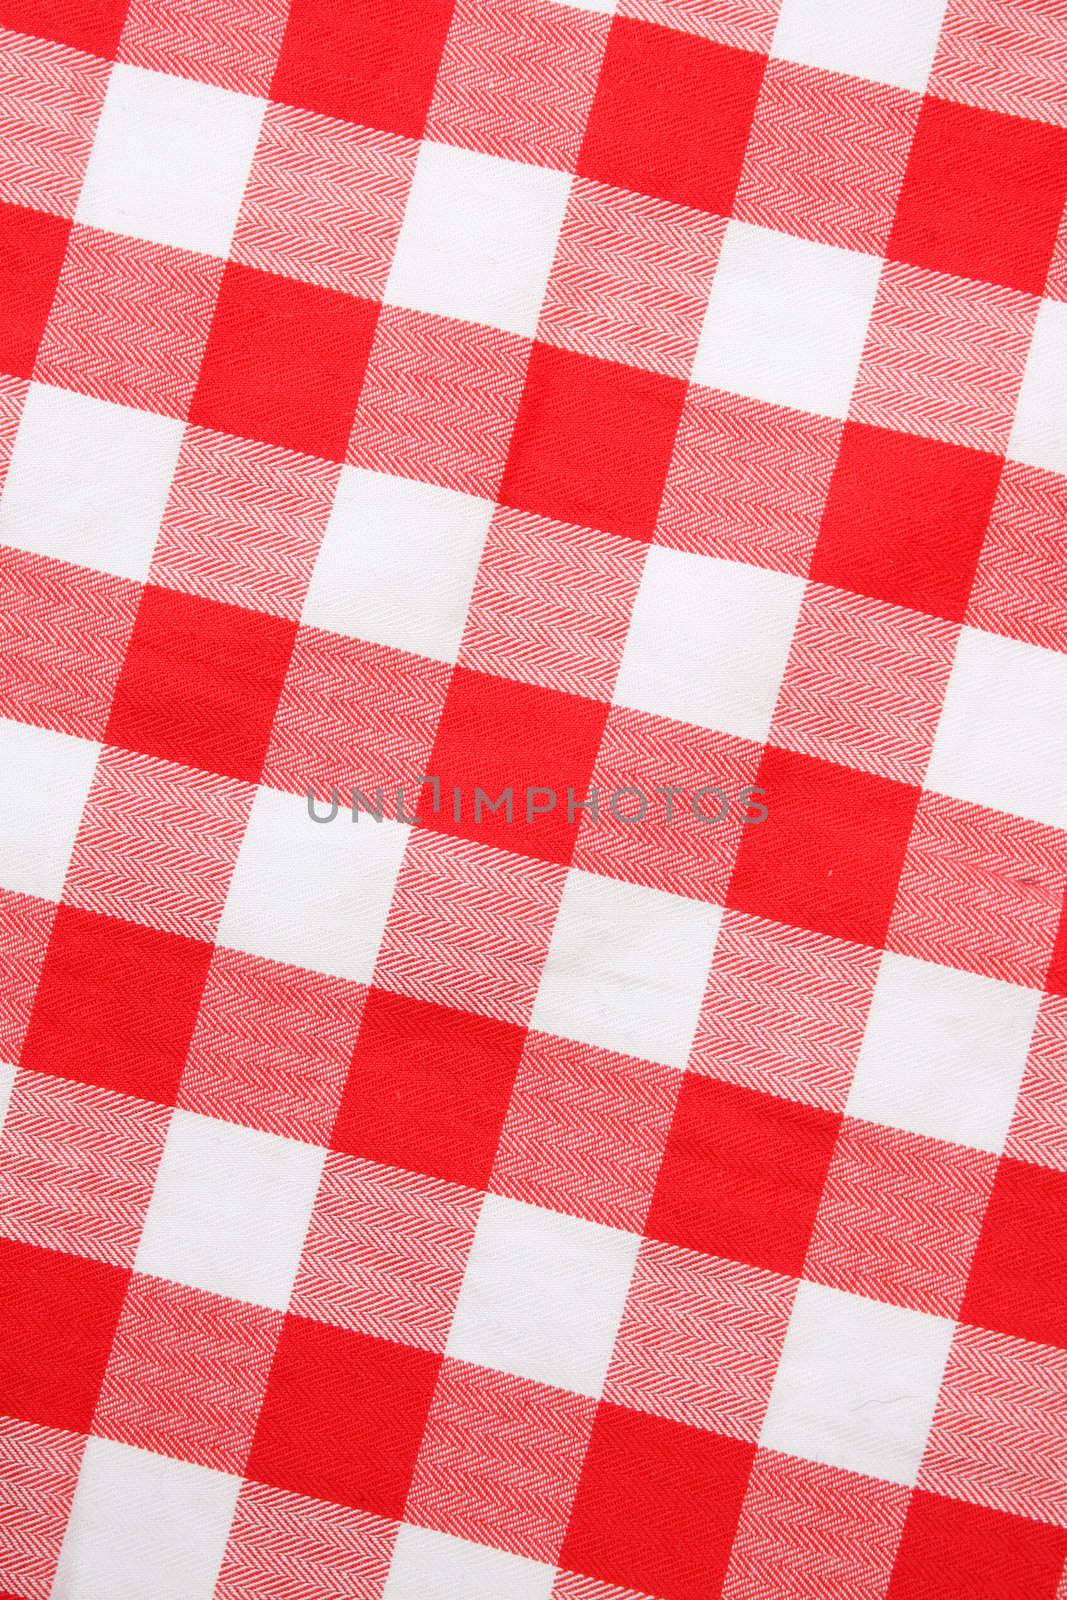 Red textile Gingham